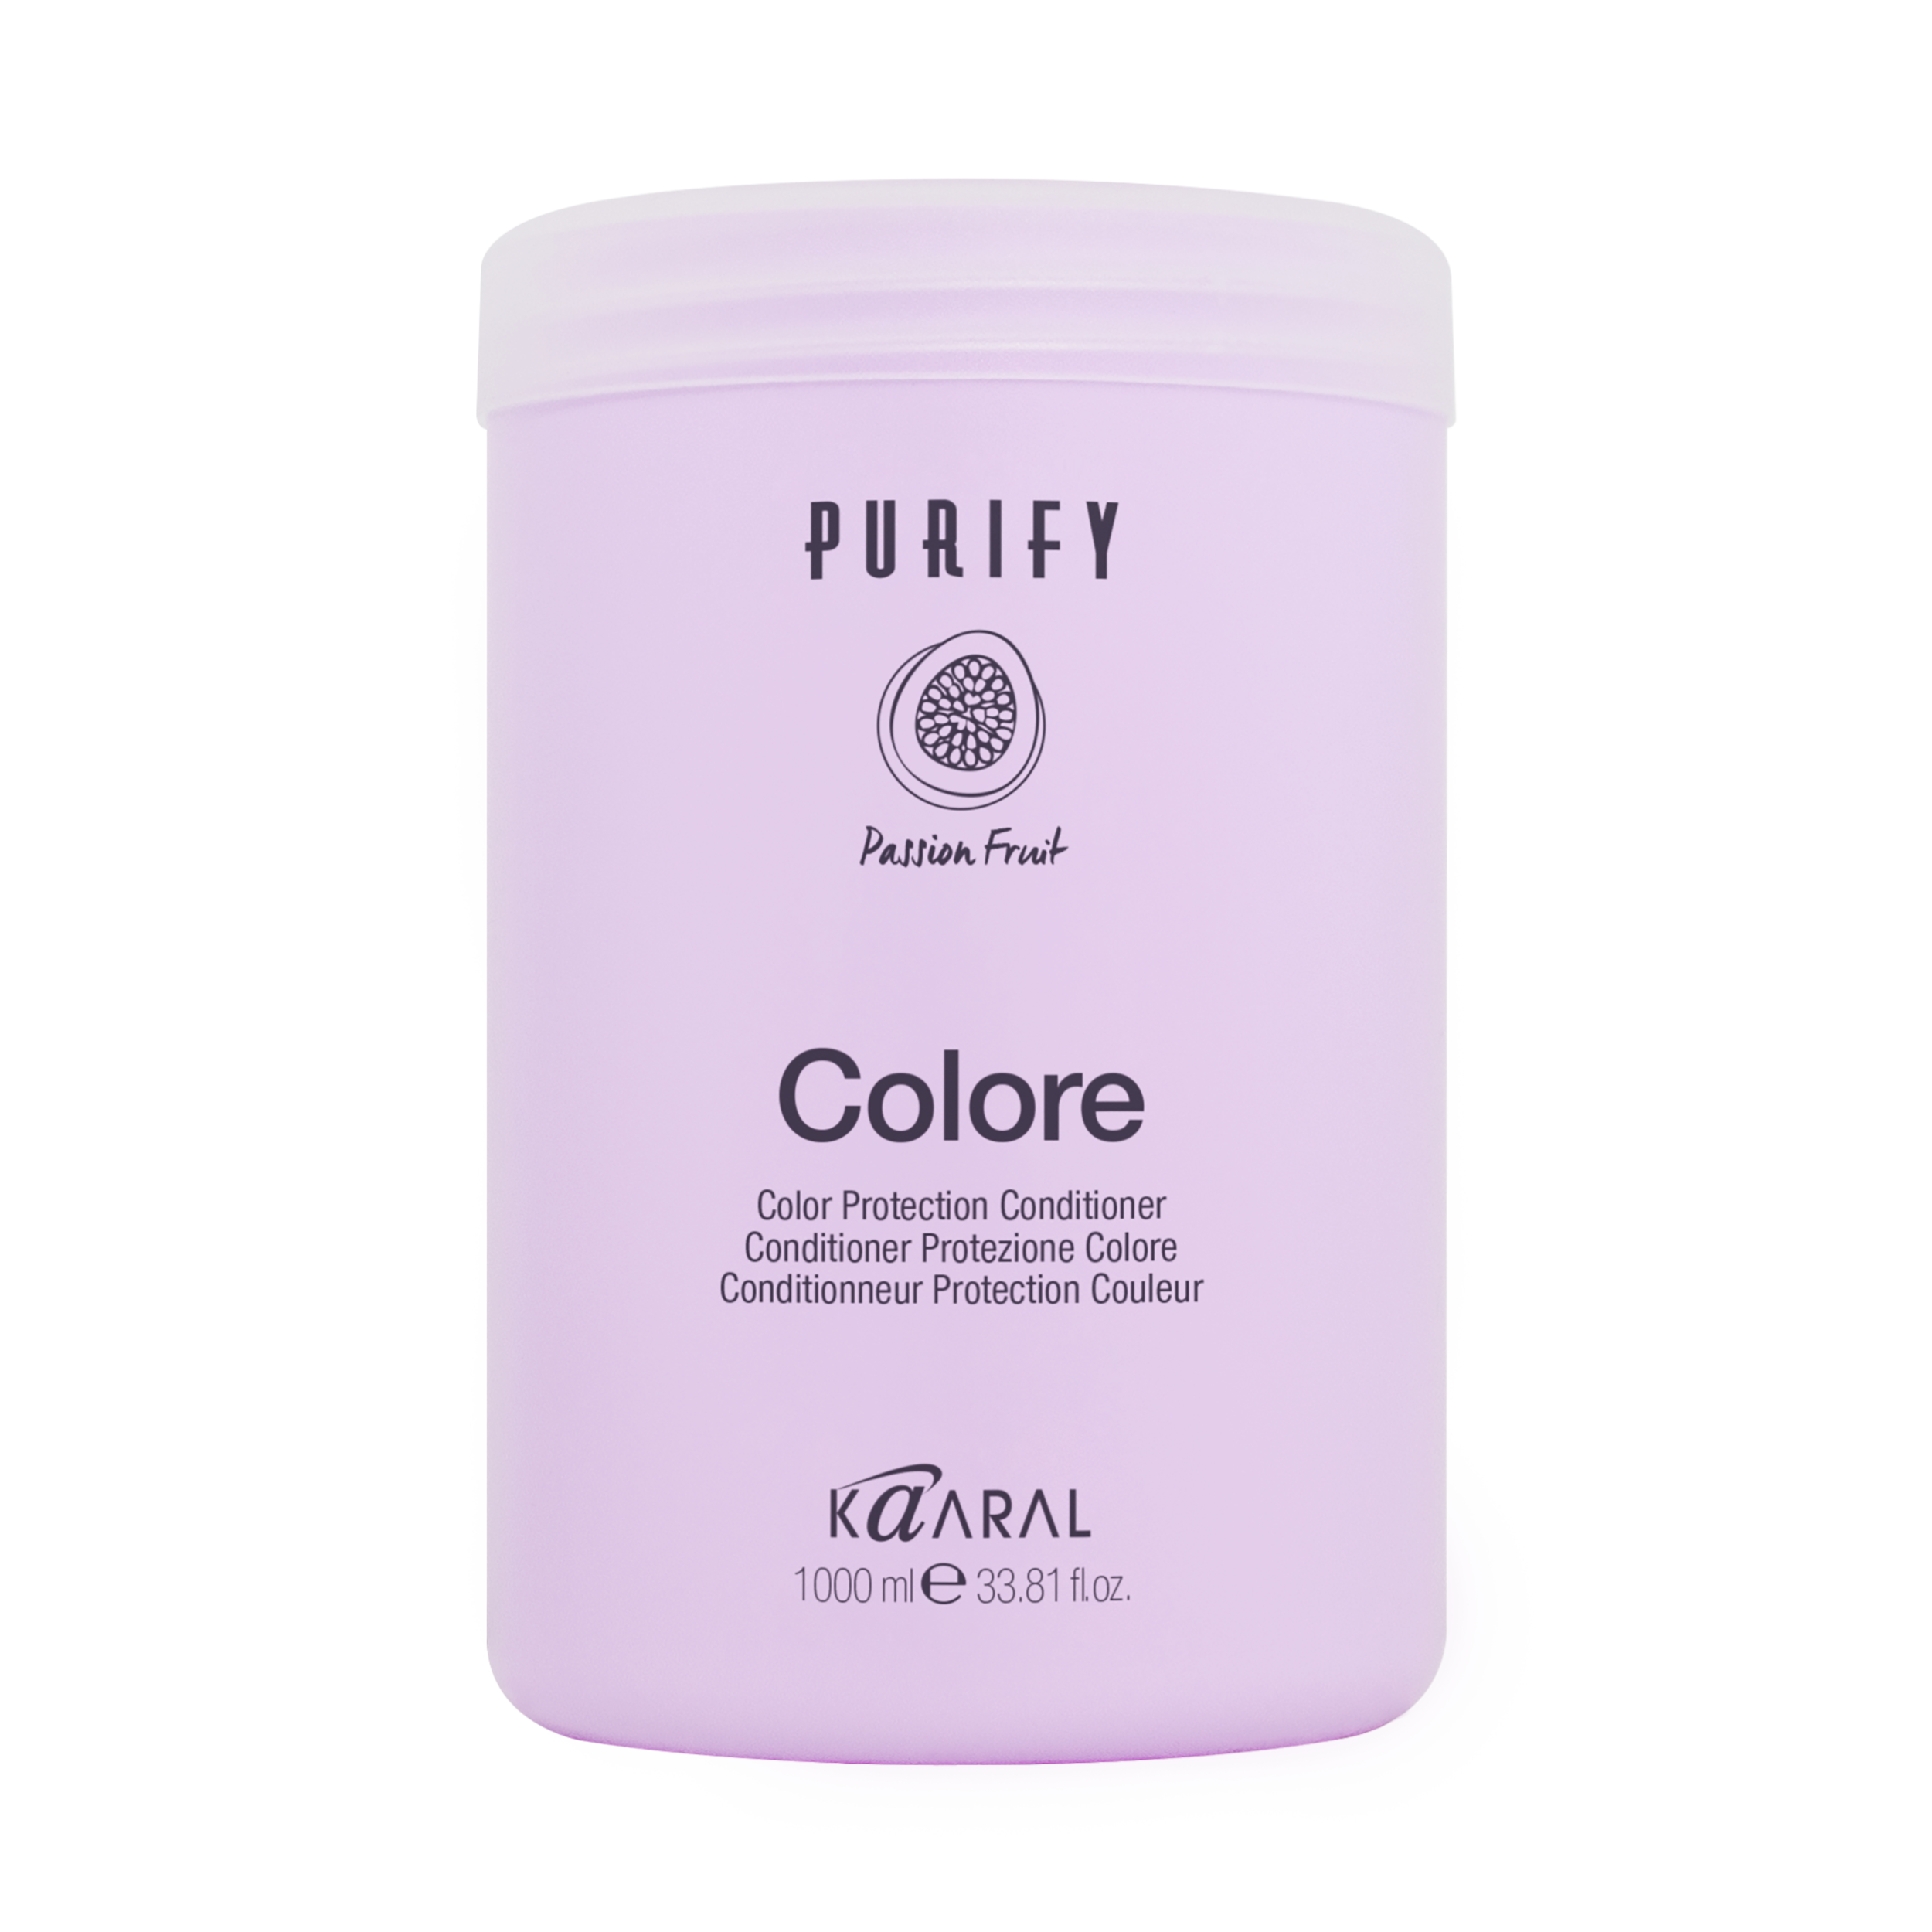 Kaaral - Purify Colore Conditioner Liter Size - Creata Beauty - Professional Beauty Products